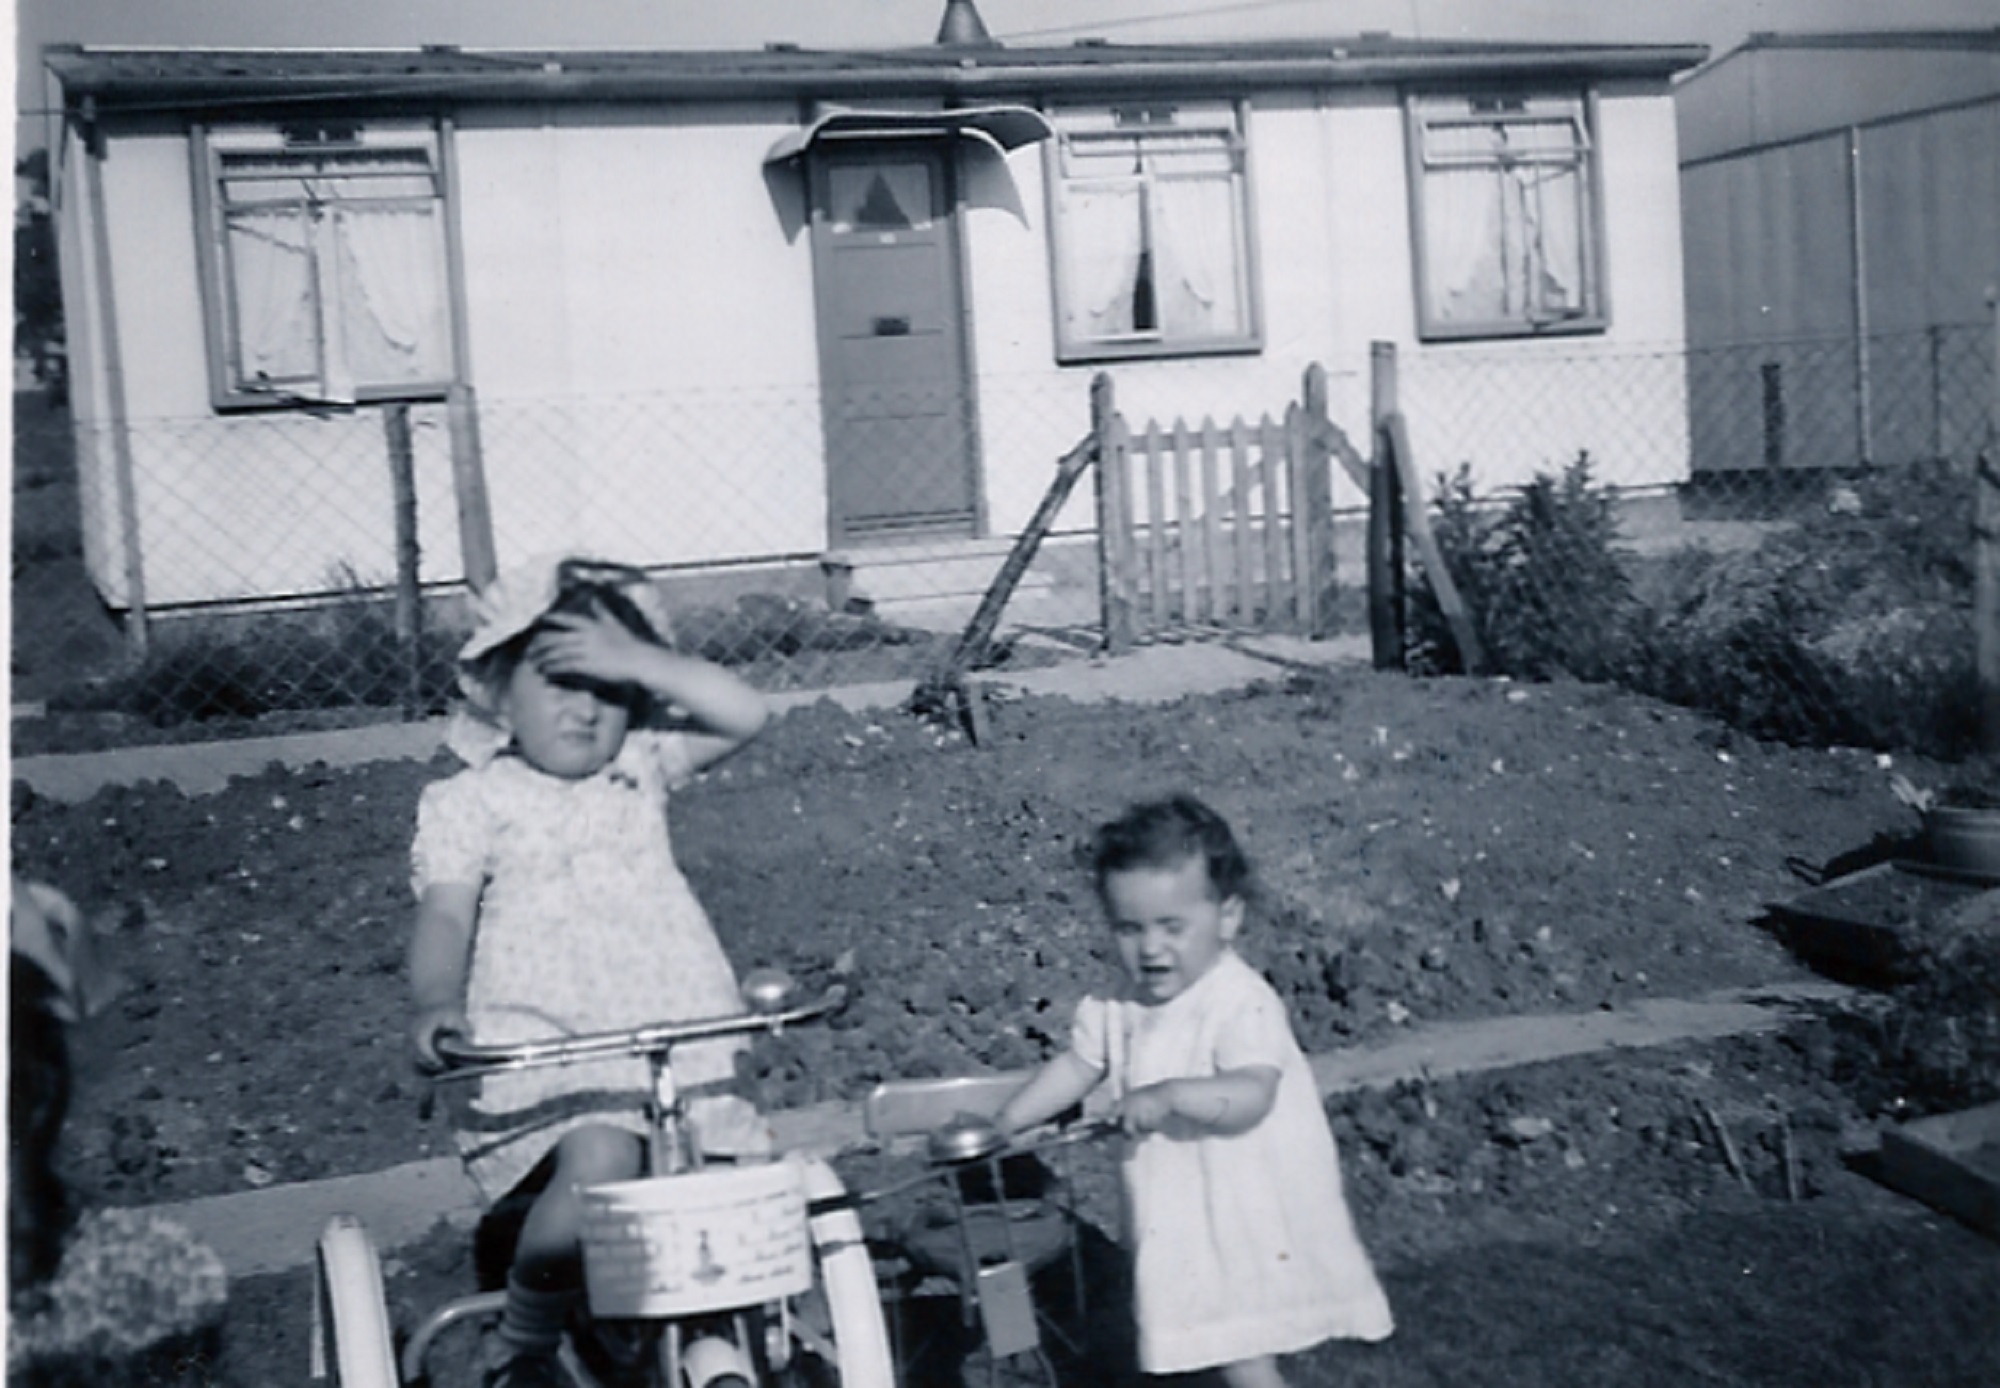 Two little girls, one on a bike, in front of a prefab on the Harold Hill estate